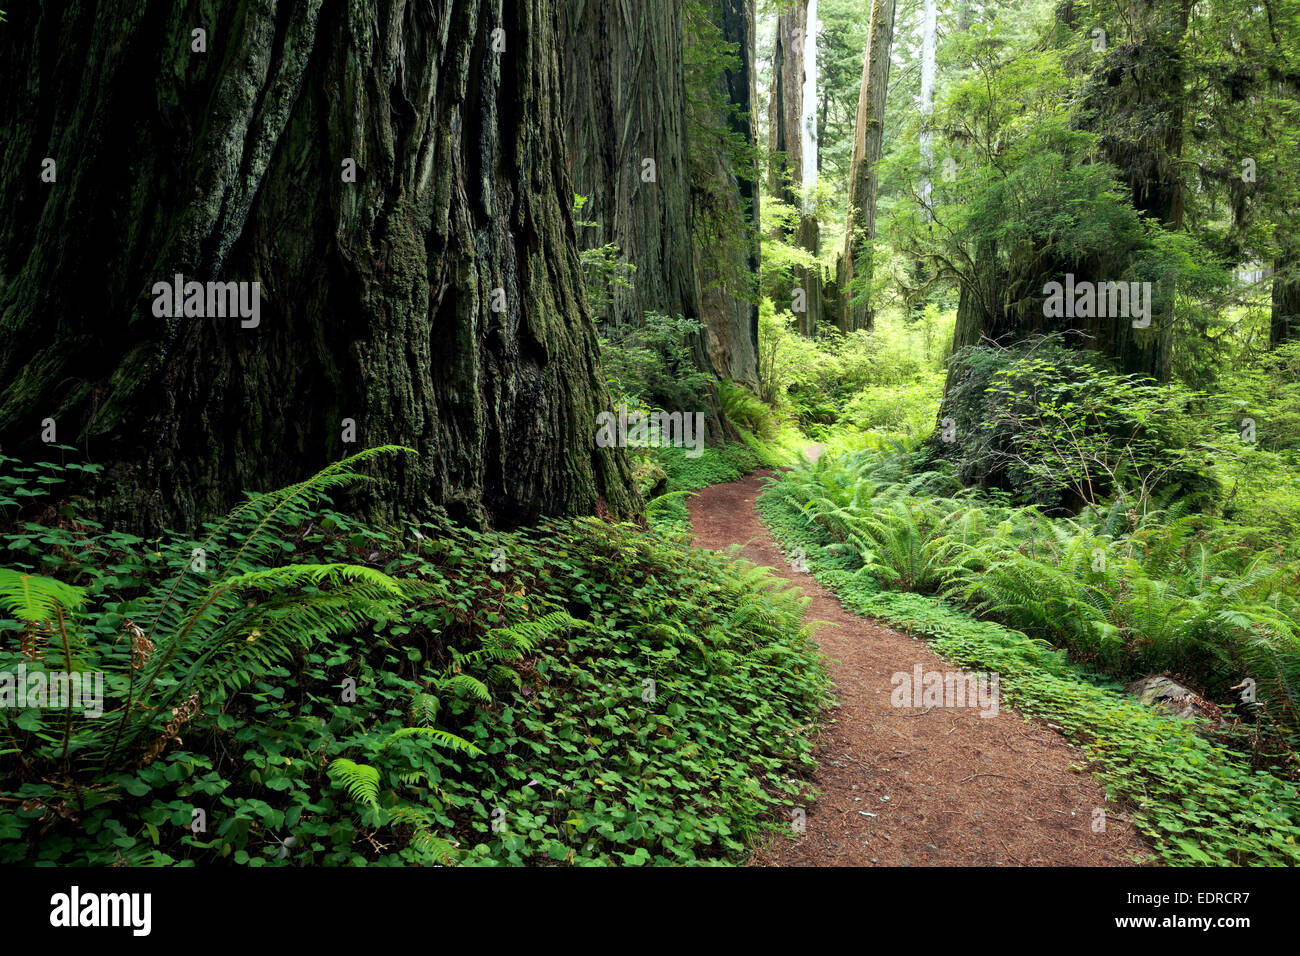 Trail through redwood forest, Prairie Creek Redwoods State Park, Humboldt County, California, USA Stock Photo